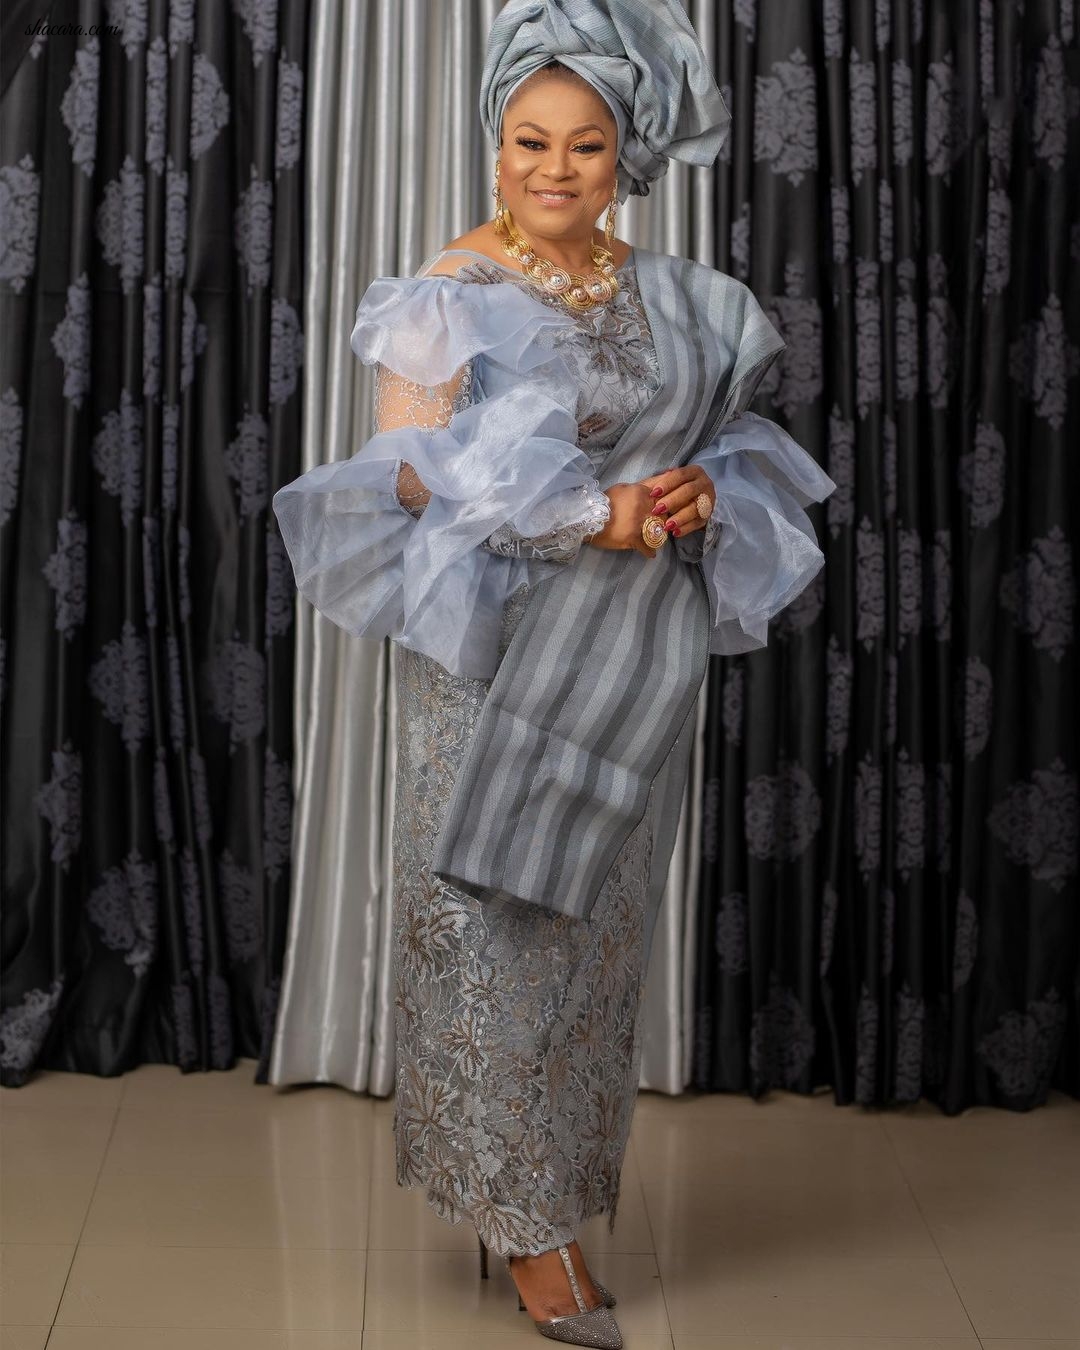 Nollywood Legend Sola Sobowale Celebrates 57th Birthday In Style